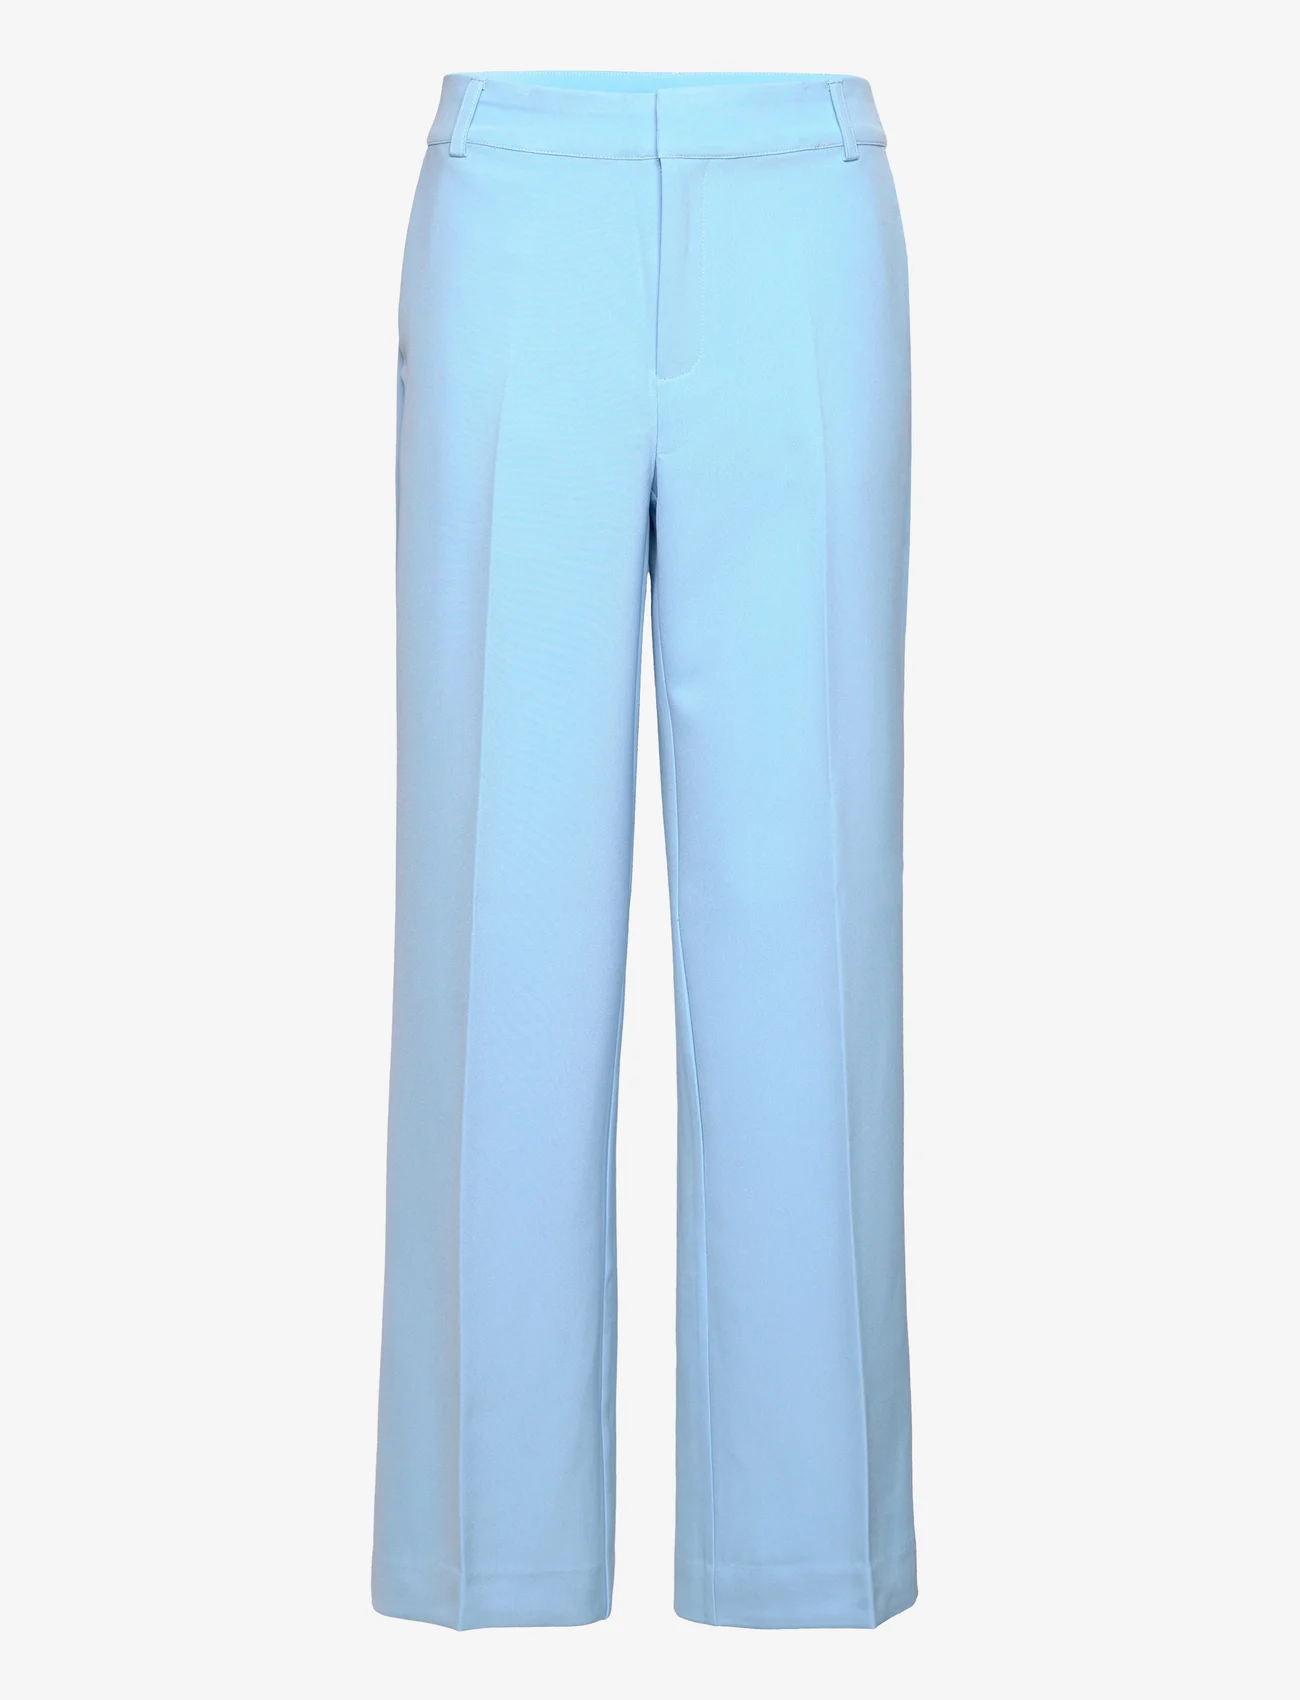 My Essential Wardrobe - 29 THE TAILORED PANT - tailored trousers - airy blue - 0